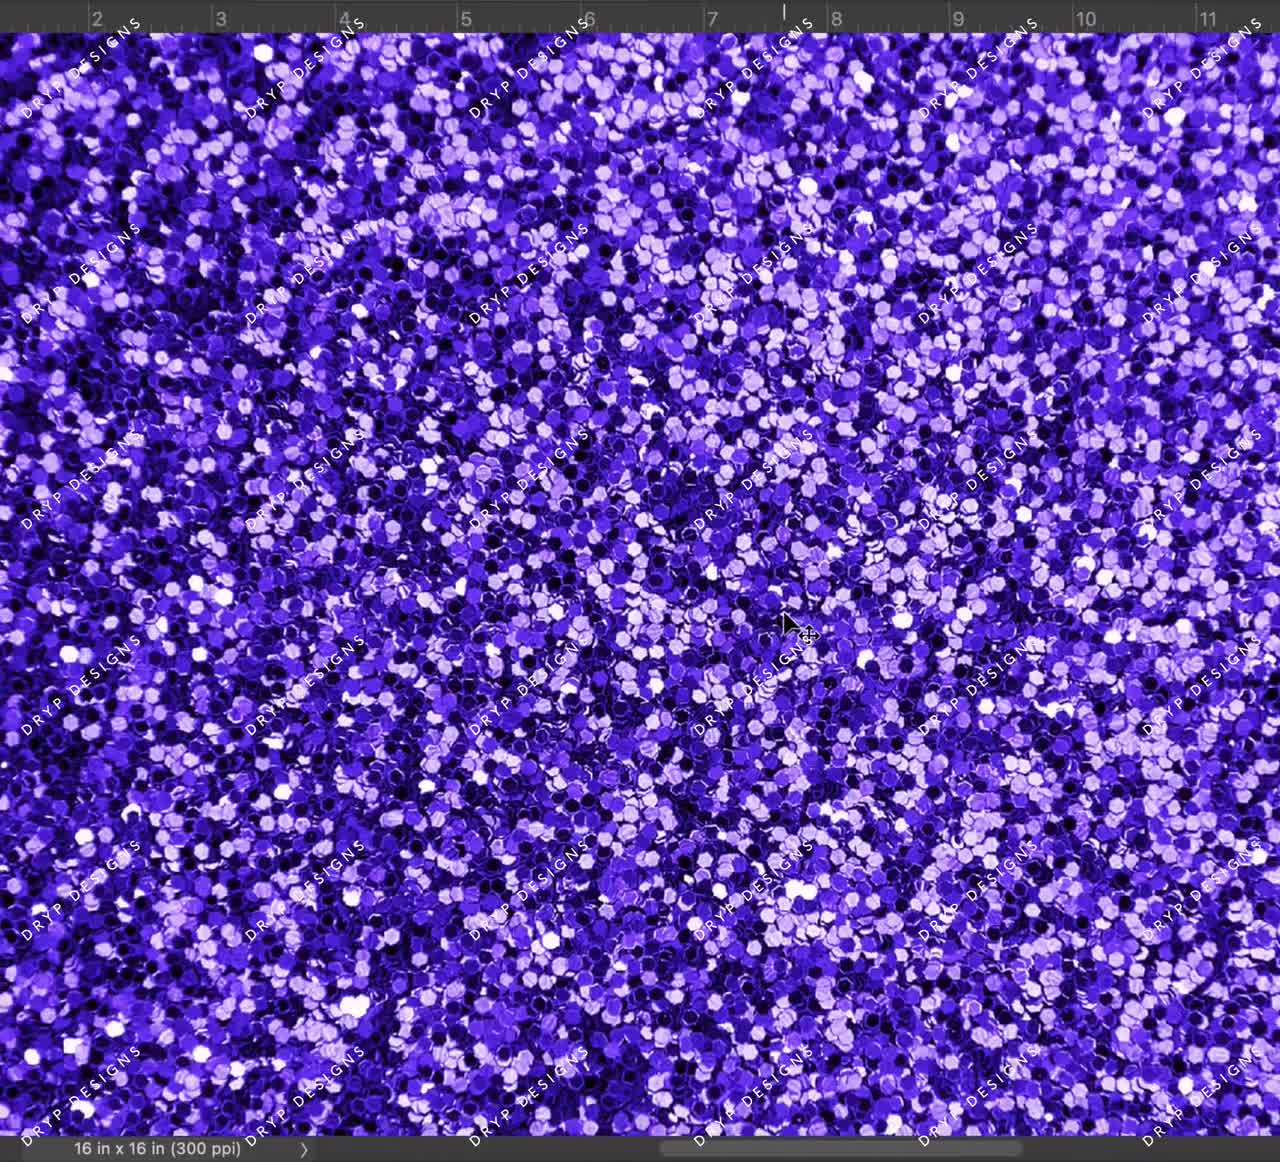 Purple colored glitter paper texture or vintage background Stock Photo -  Alamy